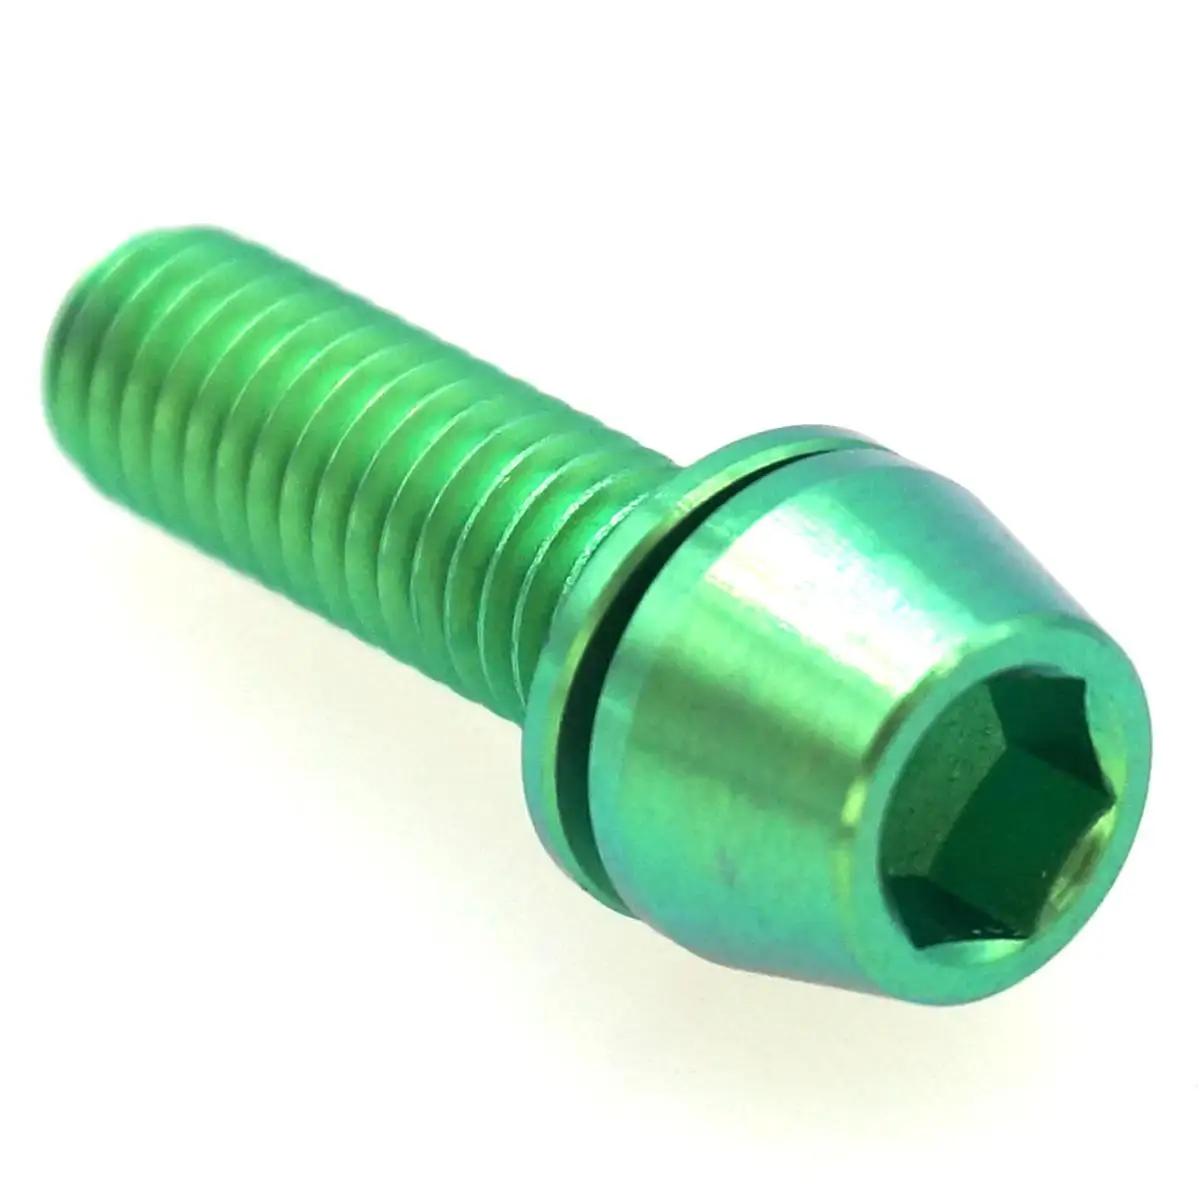 LOT 4 M6 x 20mm Green TC4 GR5 Titanium Alloy Allen Hex Screw Taper Cone Head Bolts With Washer For Bicycle